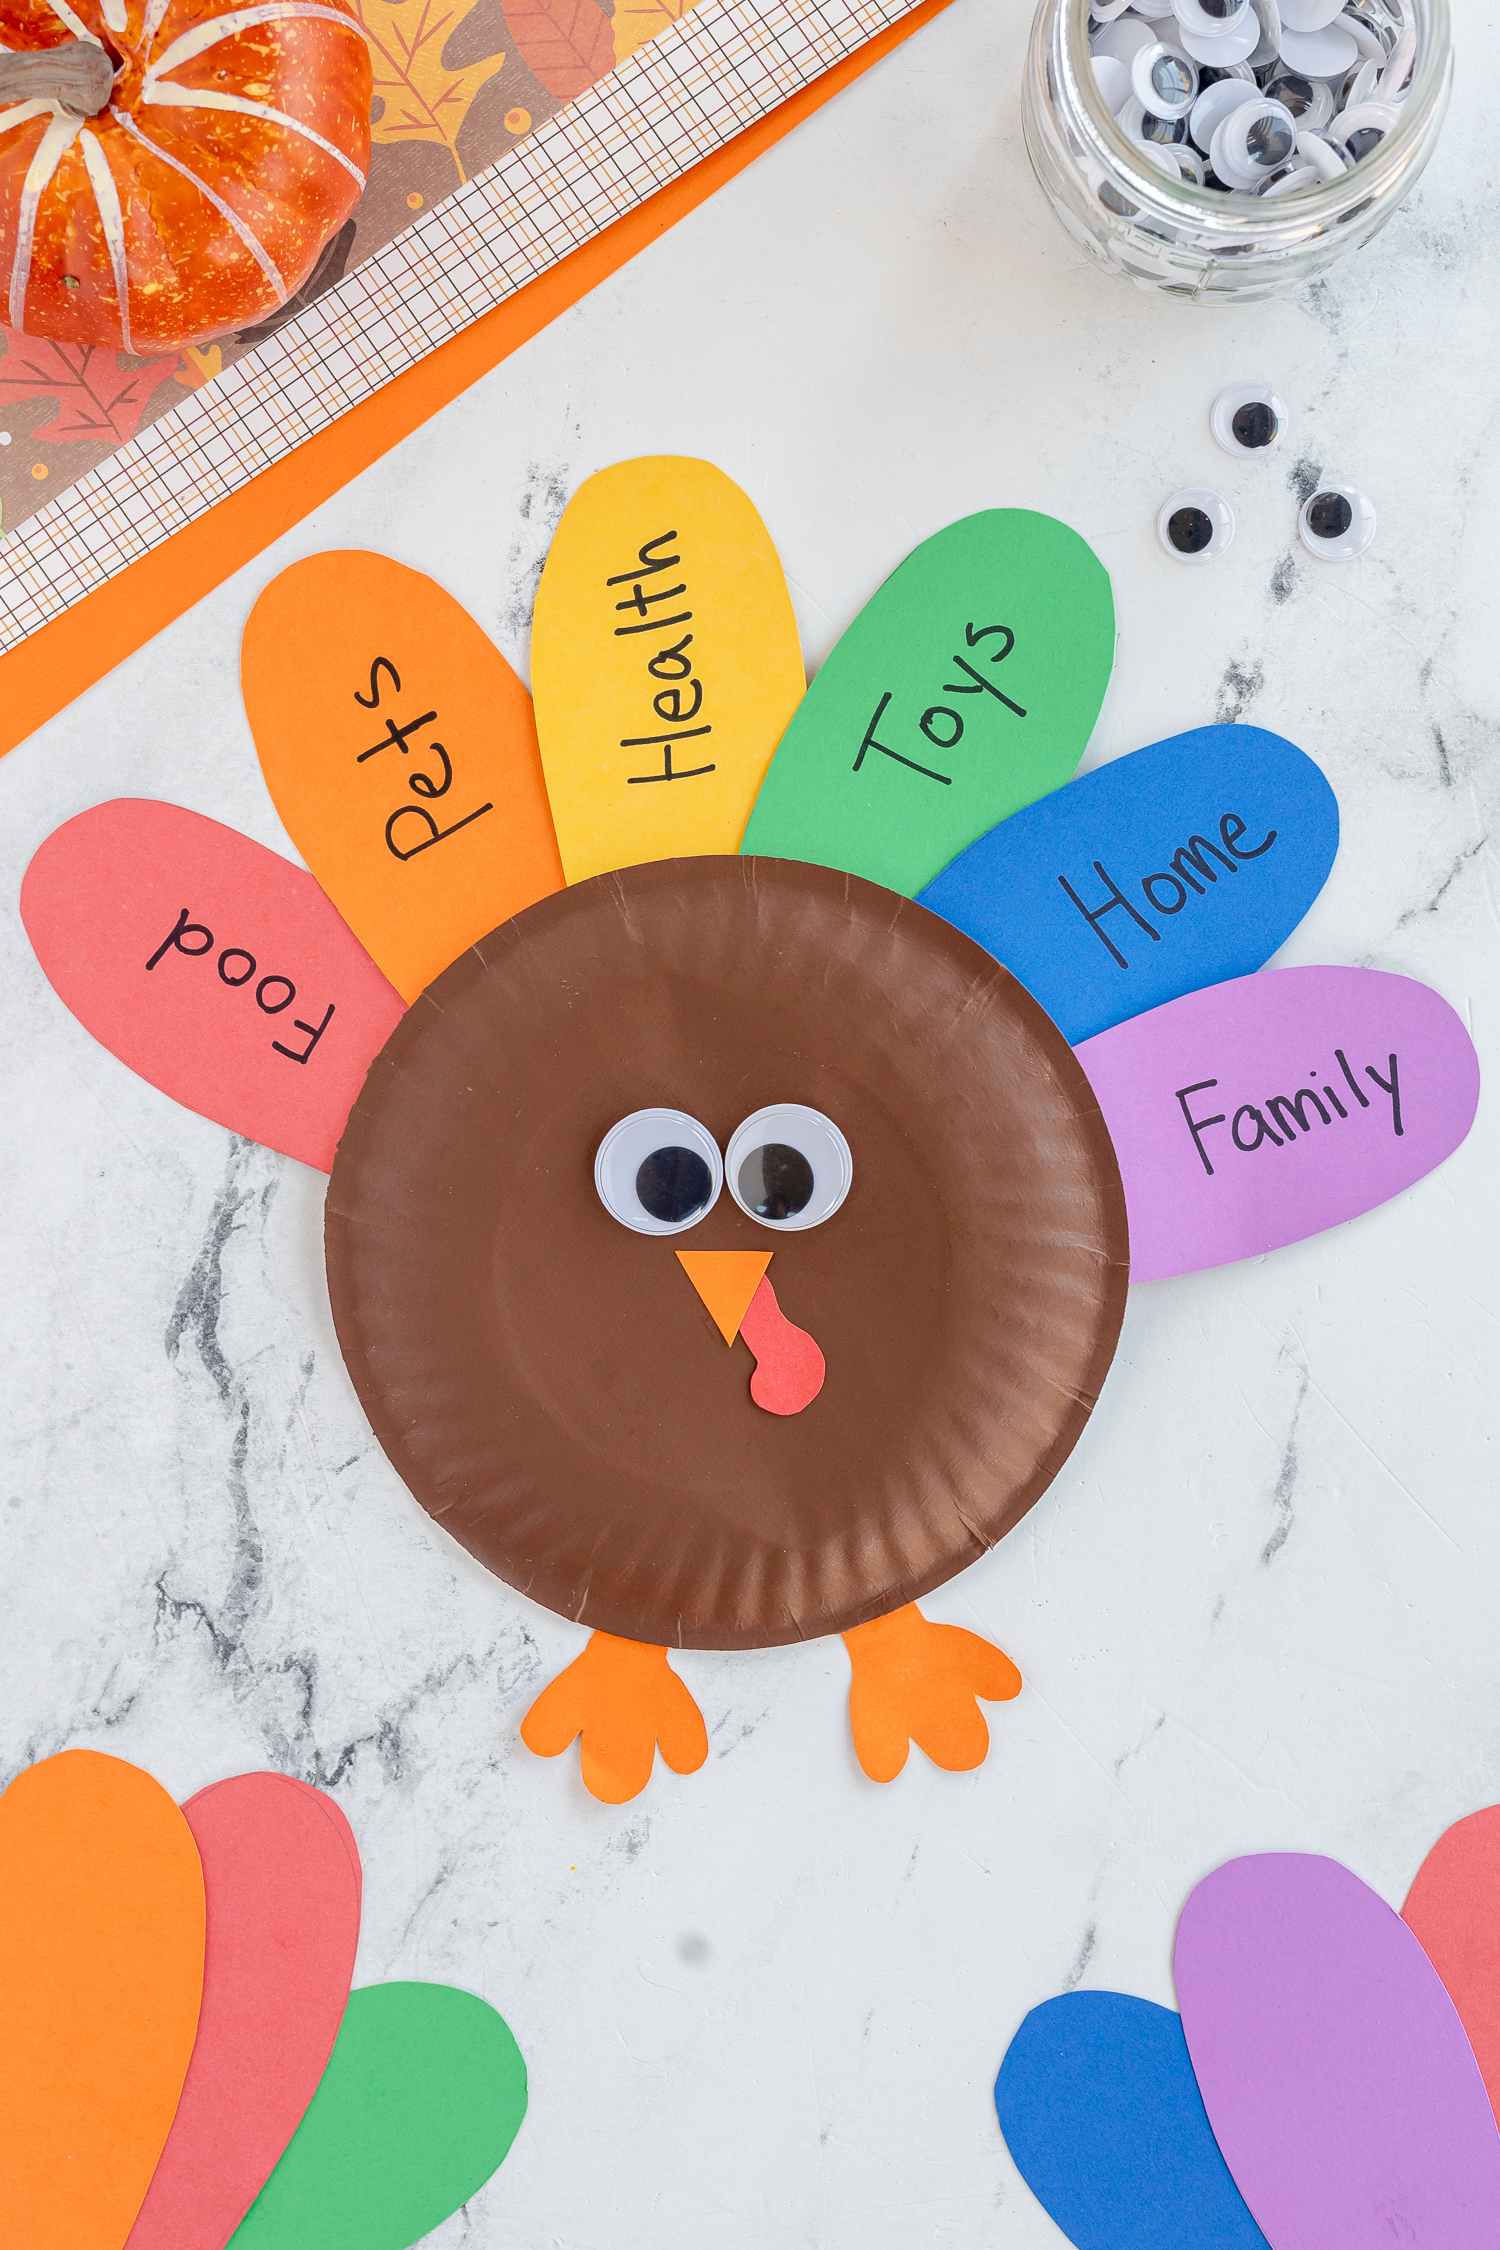 Paper Plate Turkey Craft with colorful feathers and gratitudes written on them